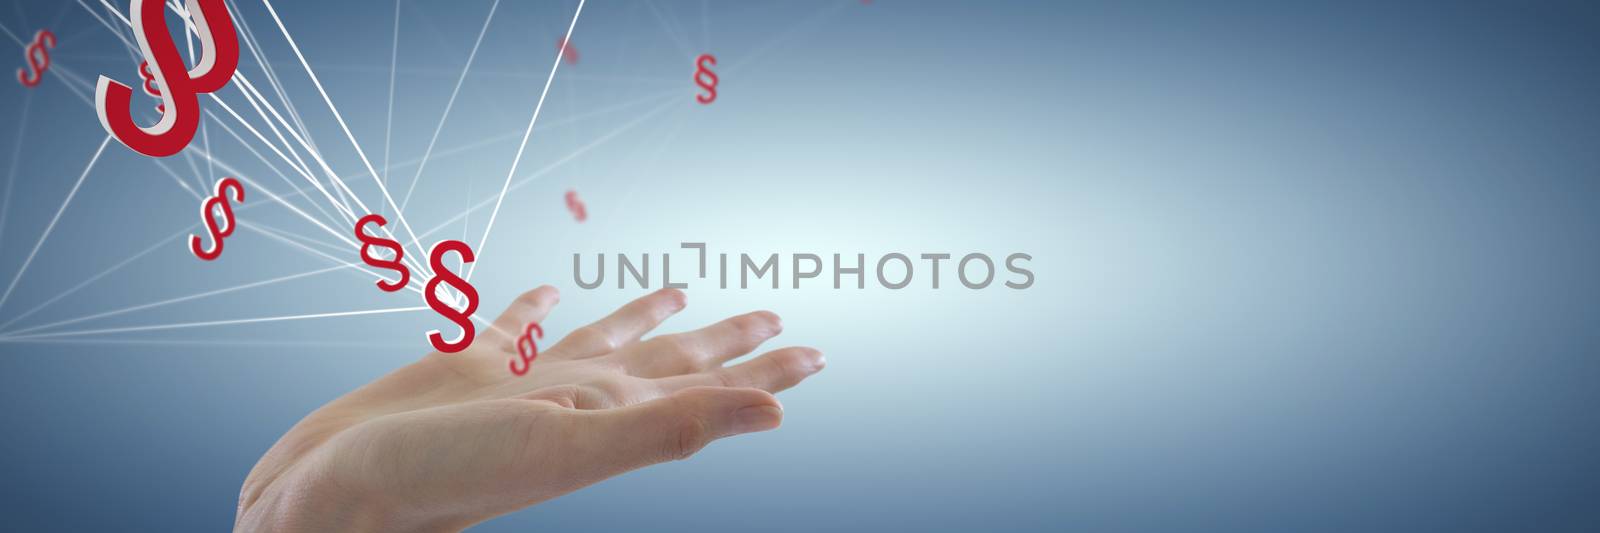 Hand gesture against white background against abstract blue background